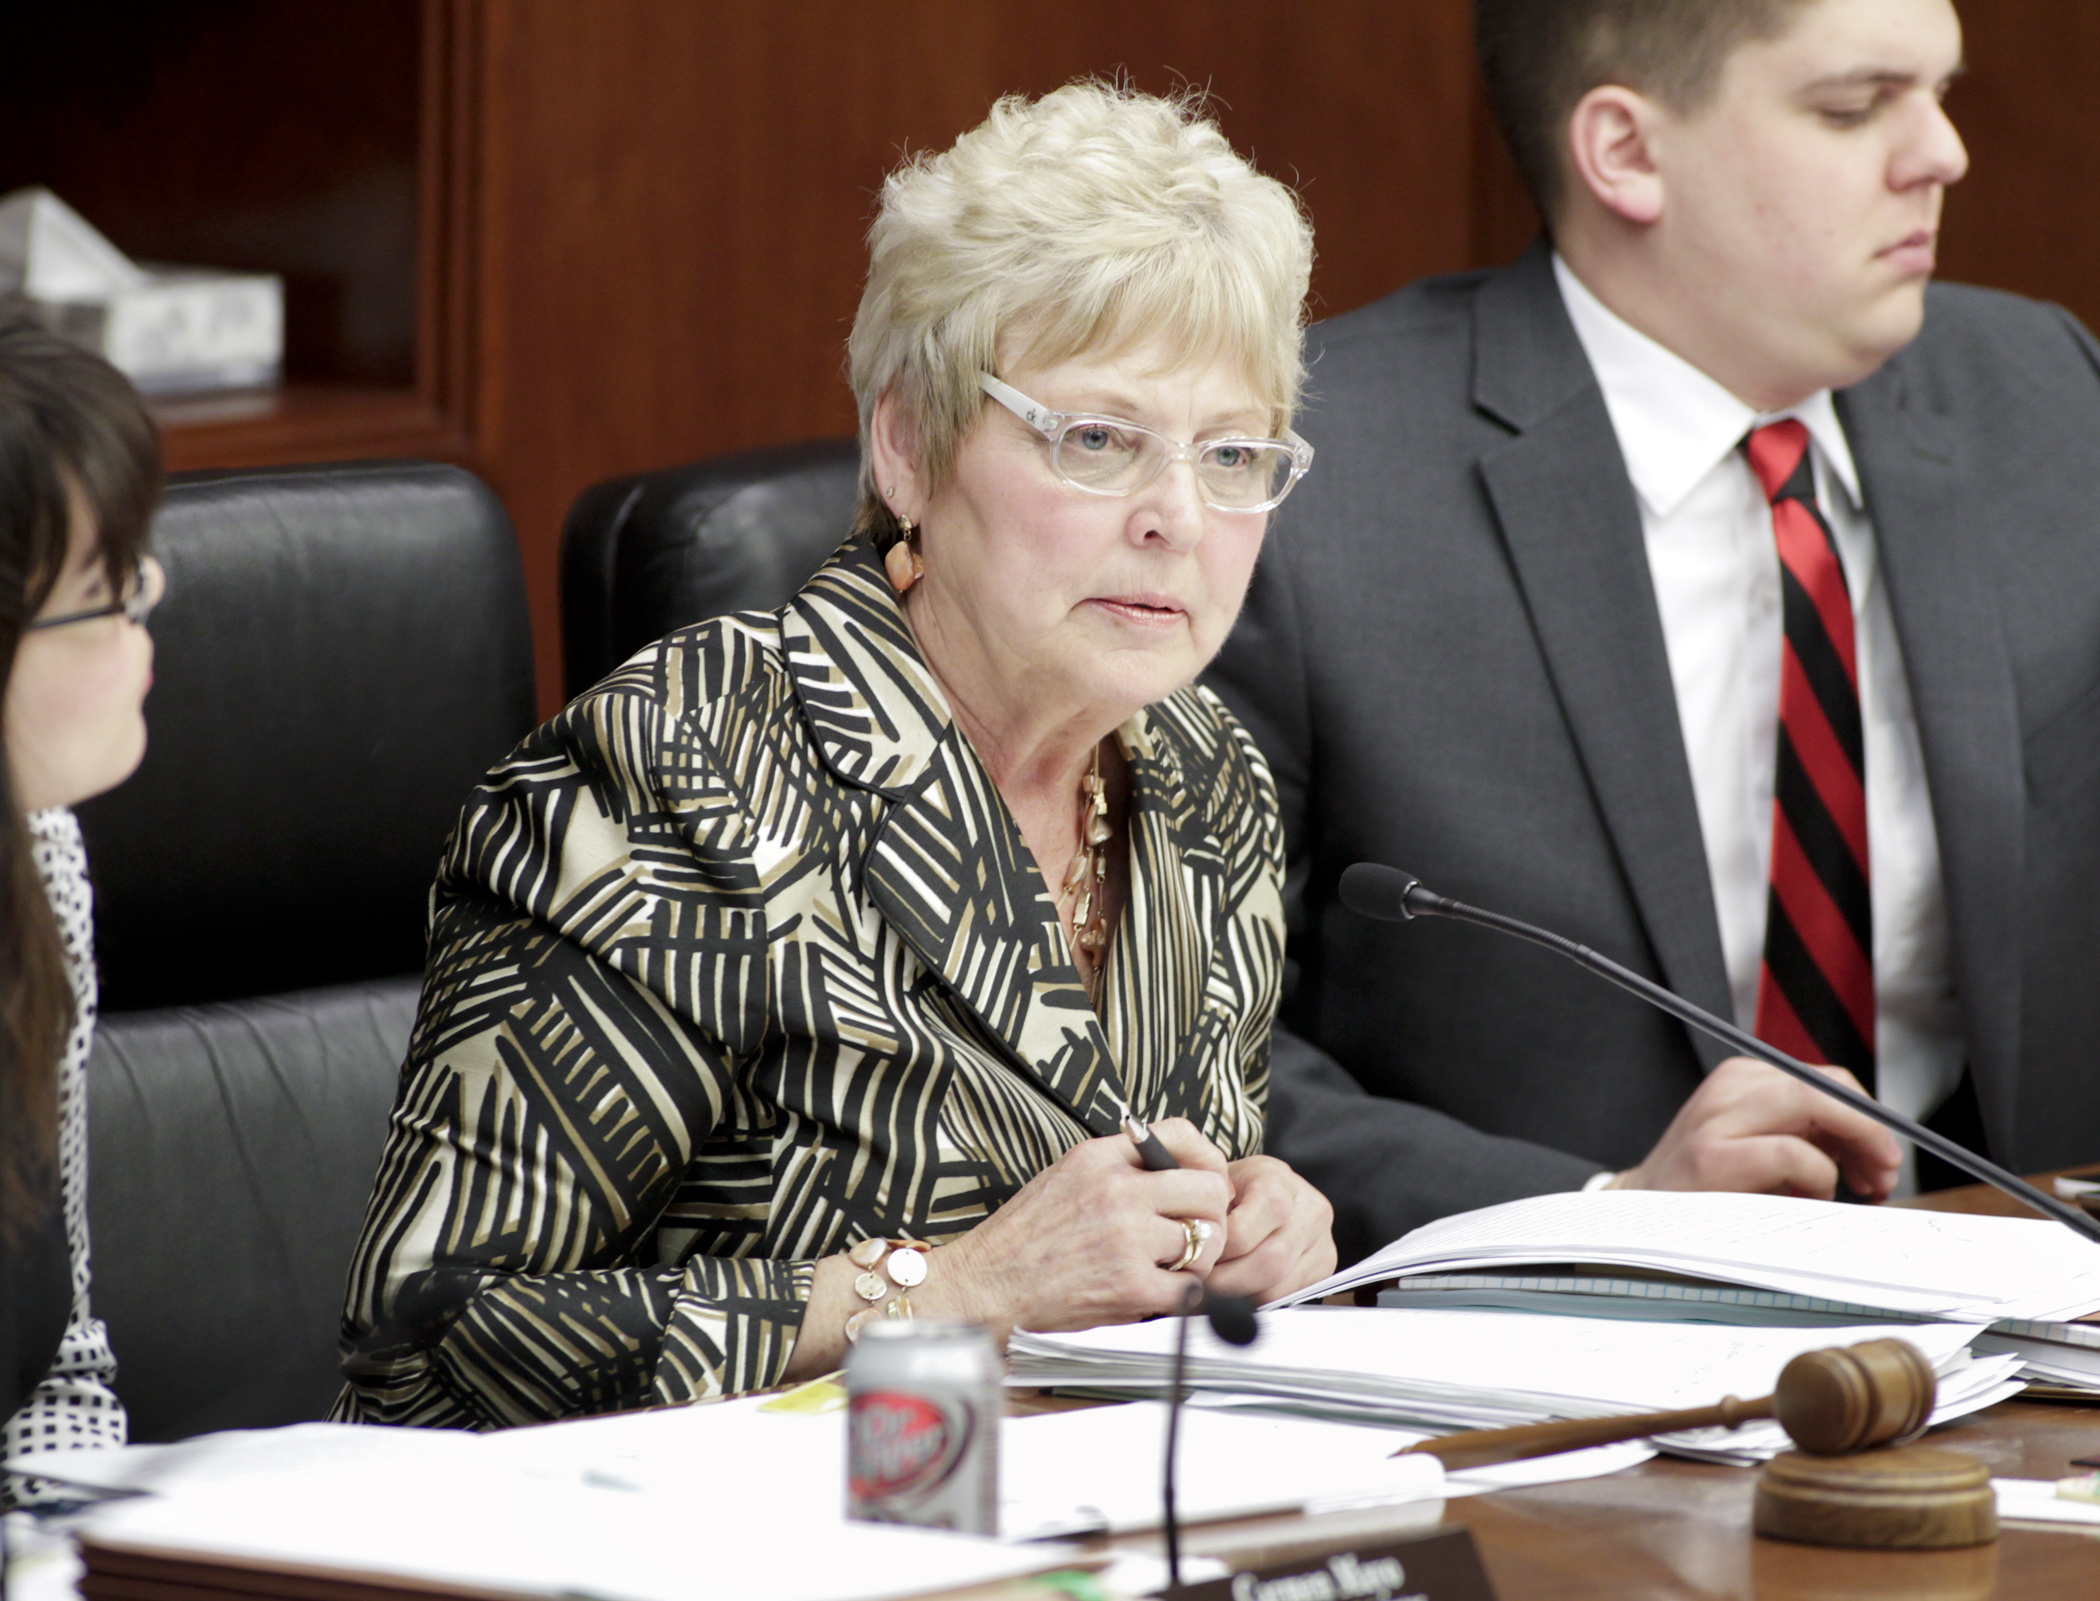 Rep. Sondra Erickson chairs the House Education Innovation Policy Committee March 19 as the omnibus education policy bill is discussed. Photo by Paul Battaglia